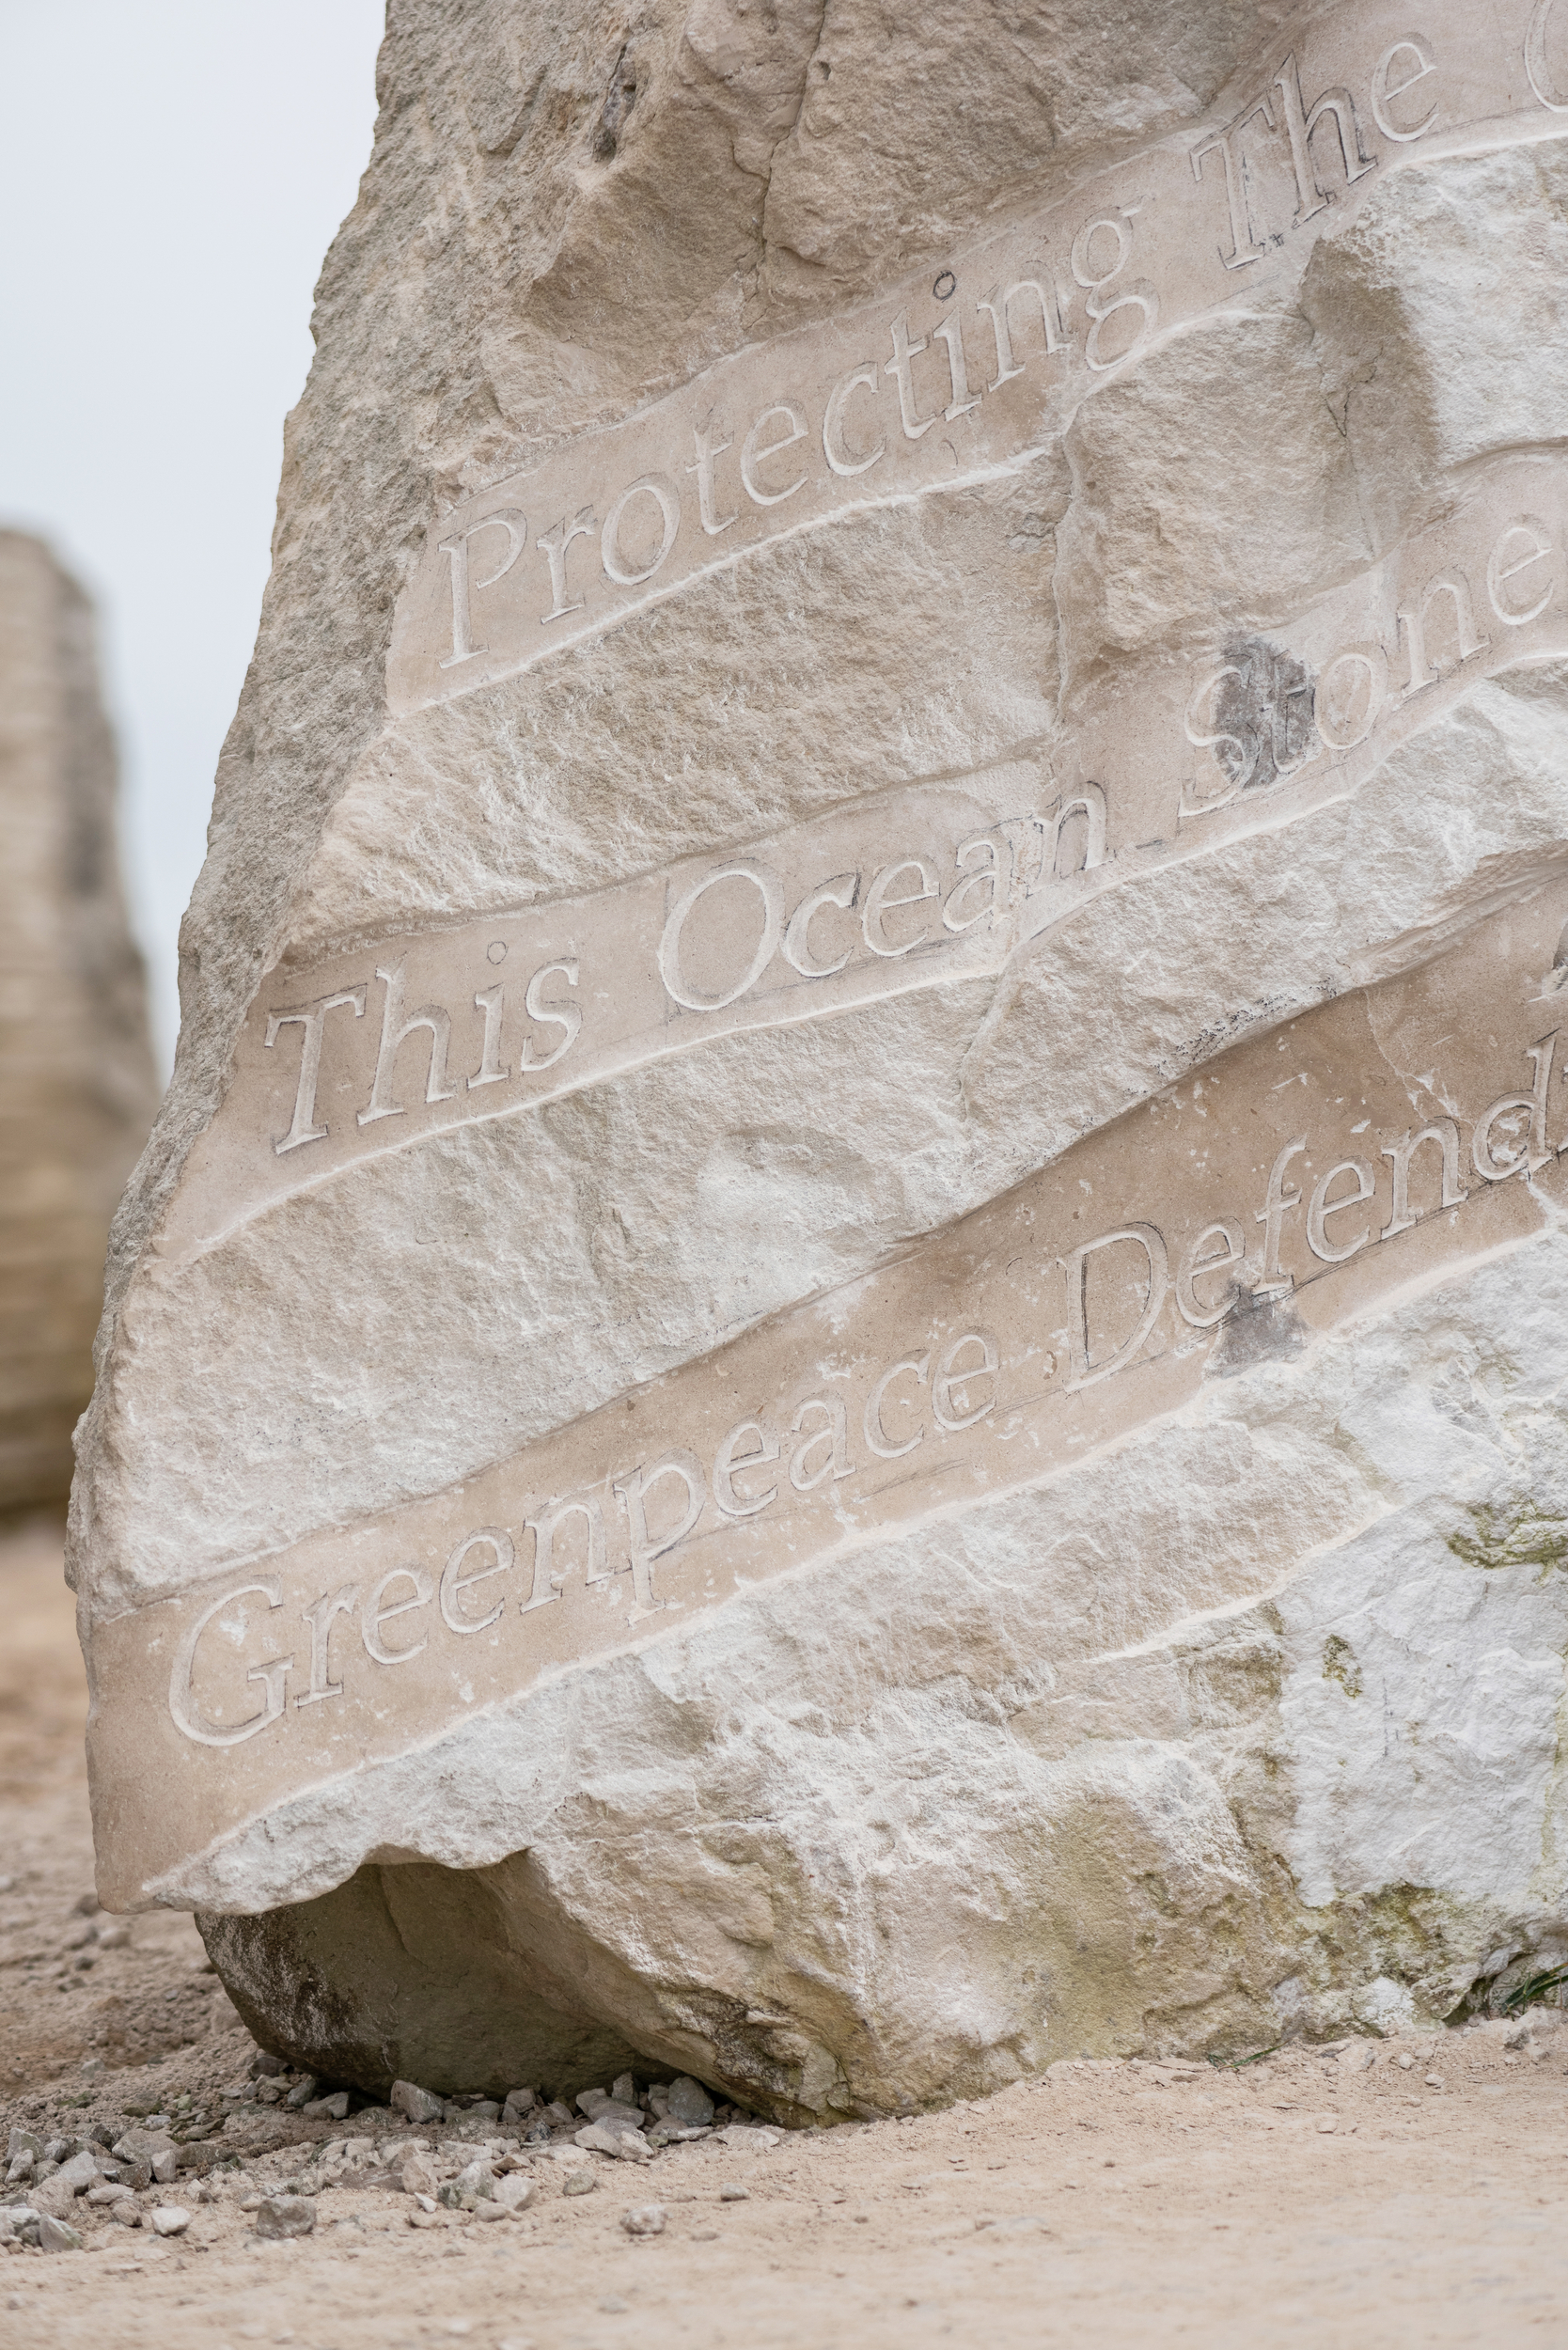 Close-up of carved text on a large stone. The fragments of text visible say: "Protecting the", "This ocean stone" and "Greenpeace defend"